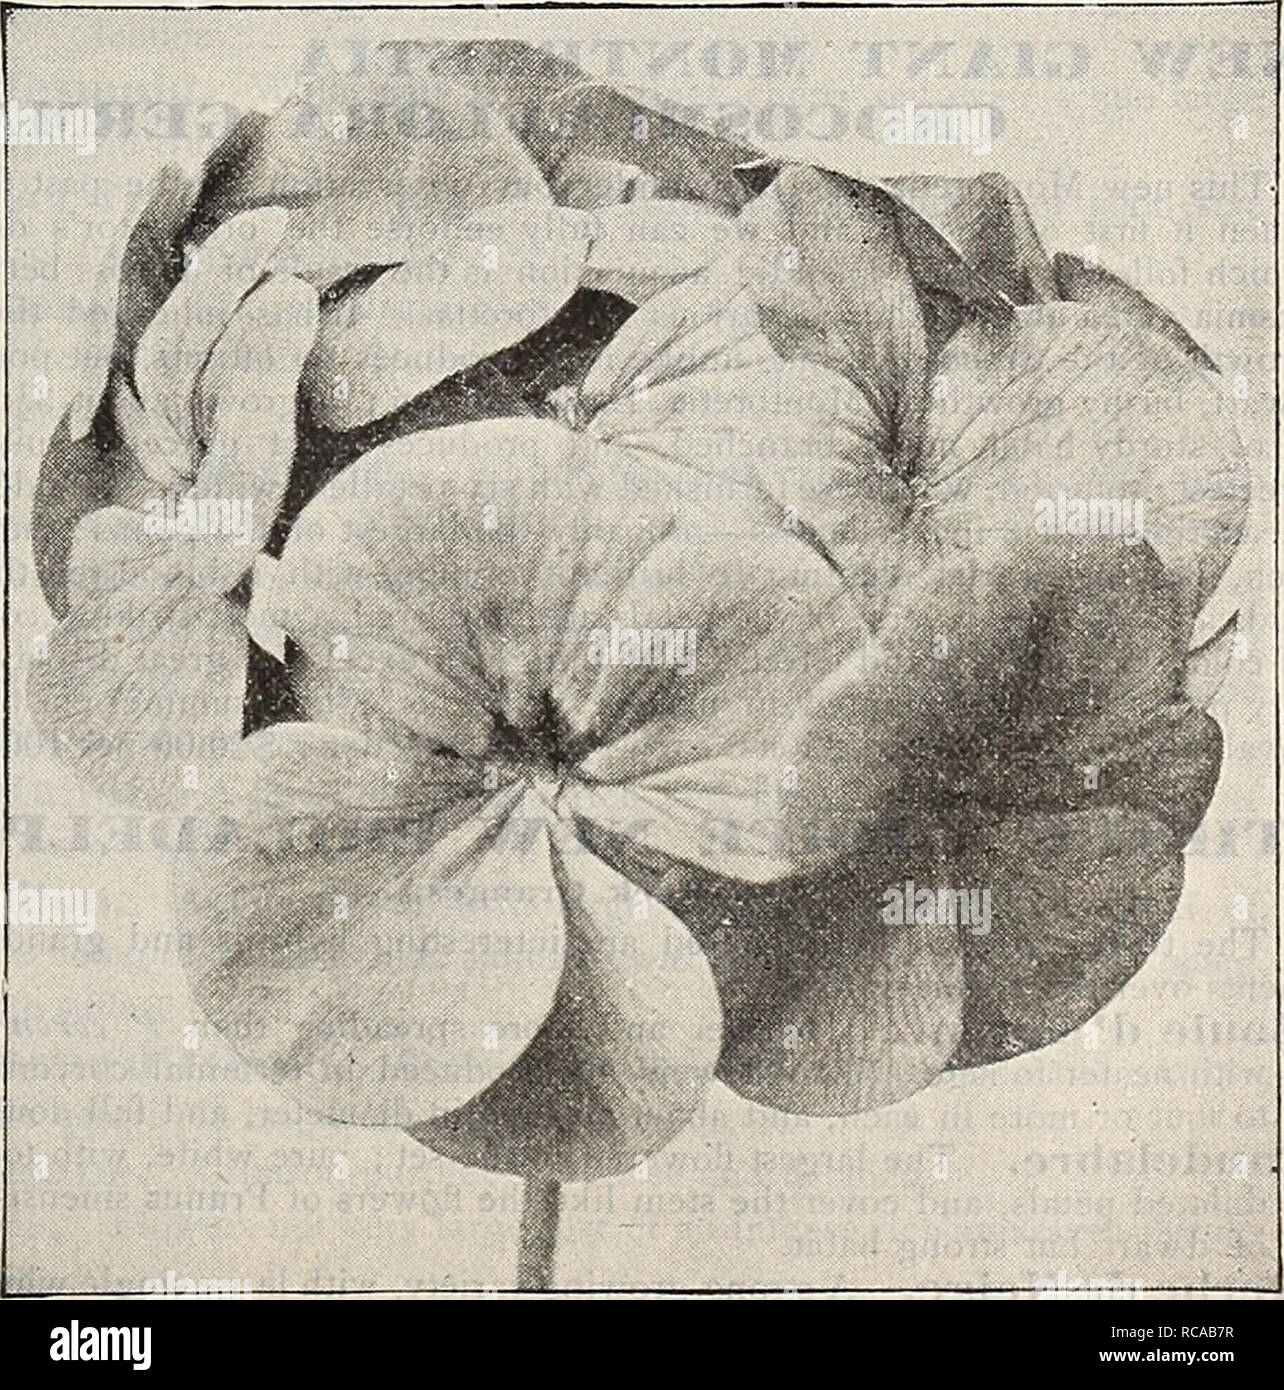 . Dreer's 1901 garden calendar. Seeds Catalogs; Nursery stock Catalogs; Gardening Equipment and supplies Catalogs; Flowers Seeds Catalogs; Vegetables Seeds Catalogs; Fruit Seeds Catalogs. The Bride each. Double IvYtLkaved Geranium Leopard. , Double pure white ; creeping habit. 25 cts. TWO VAI.UABI.E NEW^ FERNS. Adiantlini Charlottse. Our illustration on page 16 gives a faint idea of the beauty and grace of this new Maidenhair; it is en- tirely distinct from all other varieties, and even more graceful than A. gracillimitm, and possessing the advantage of having much stouter, stiffer stems, on a Stock Photo